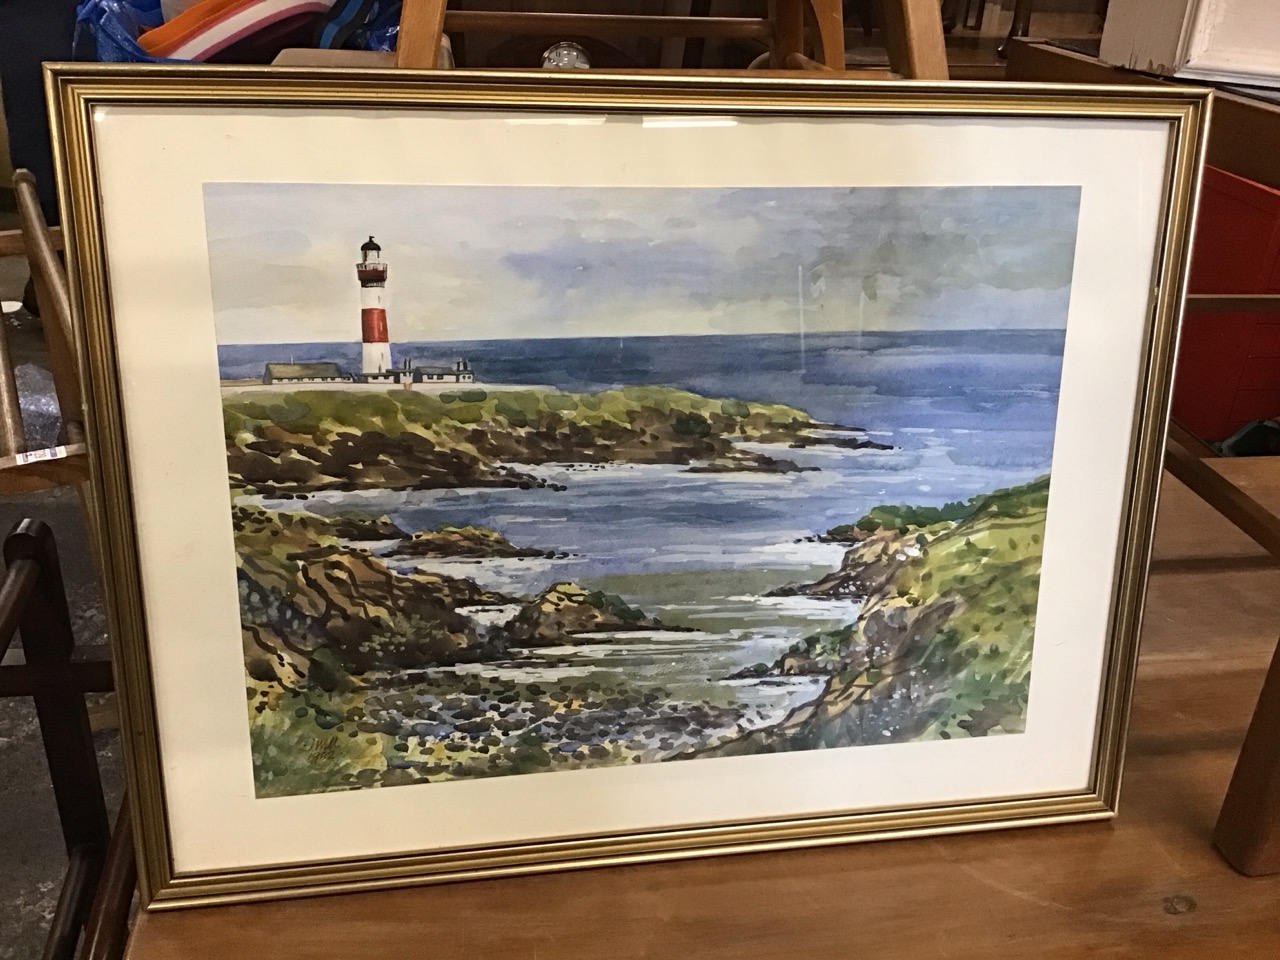 J Will, watercolour, rocky coastal scene with a lighthouse, titled Buchanness Lighthouse to verso,